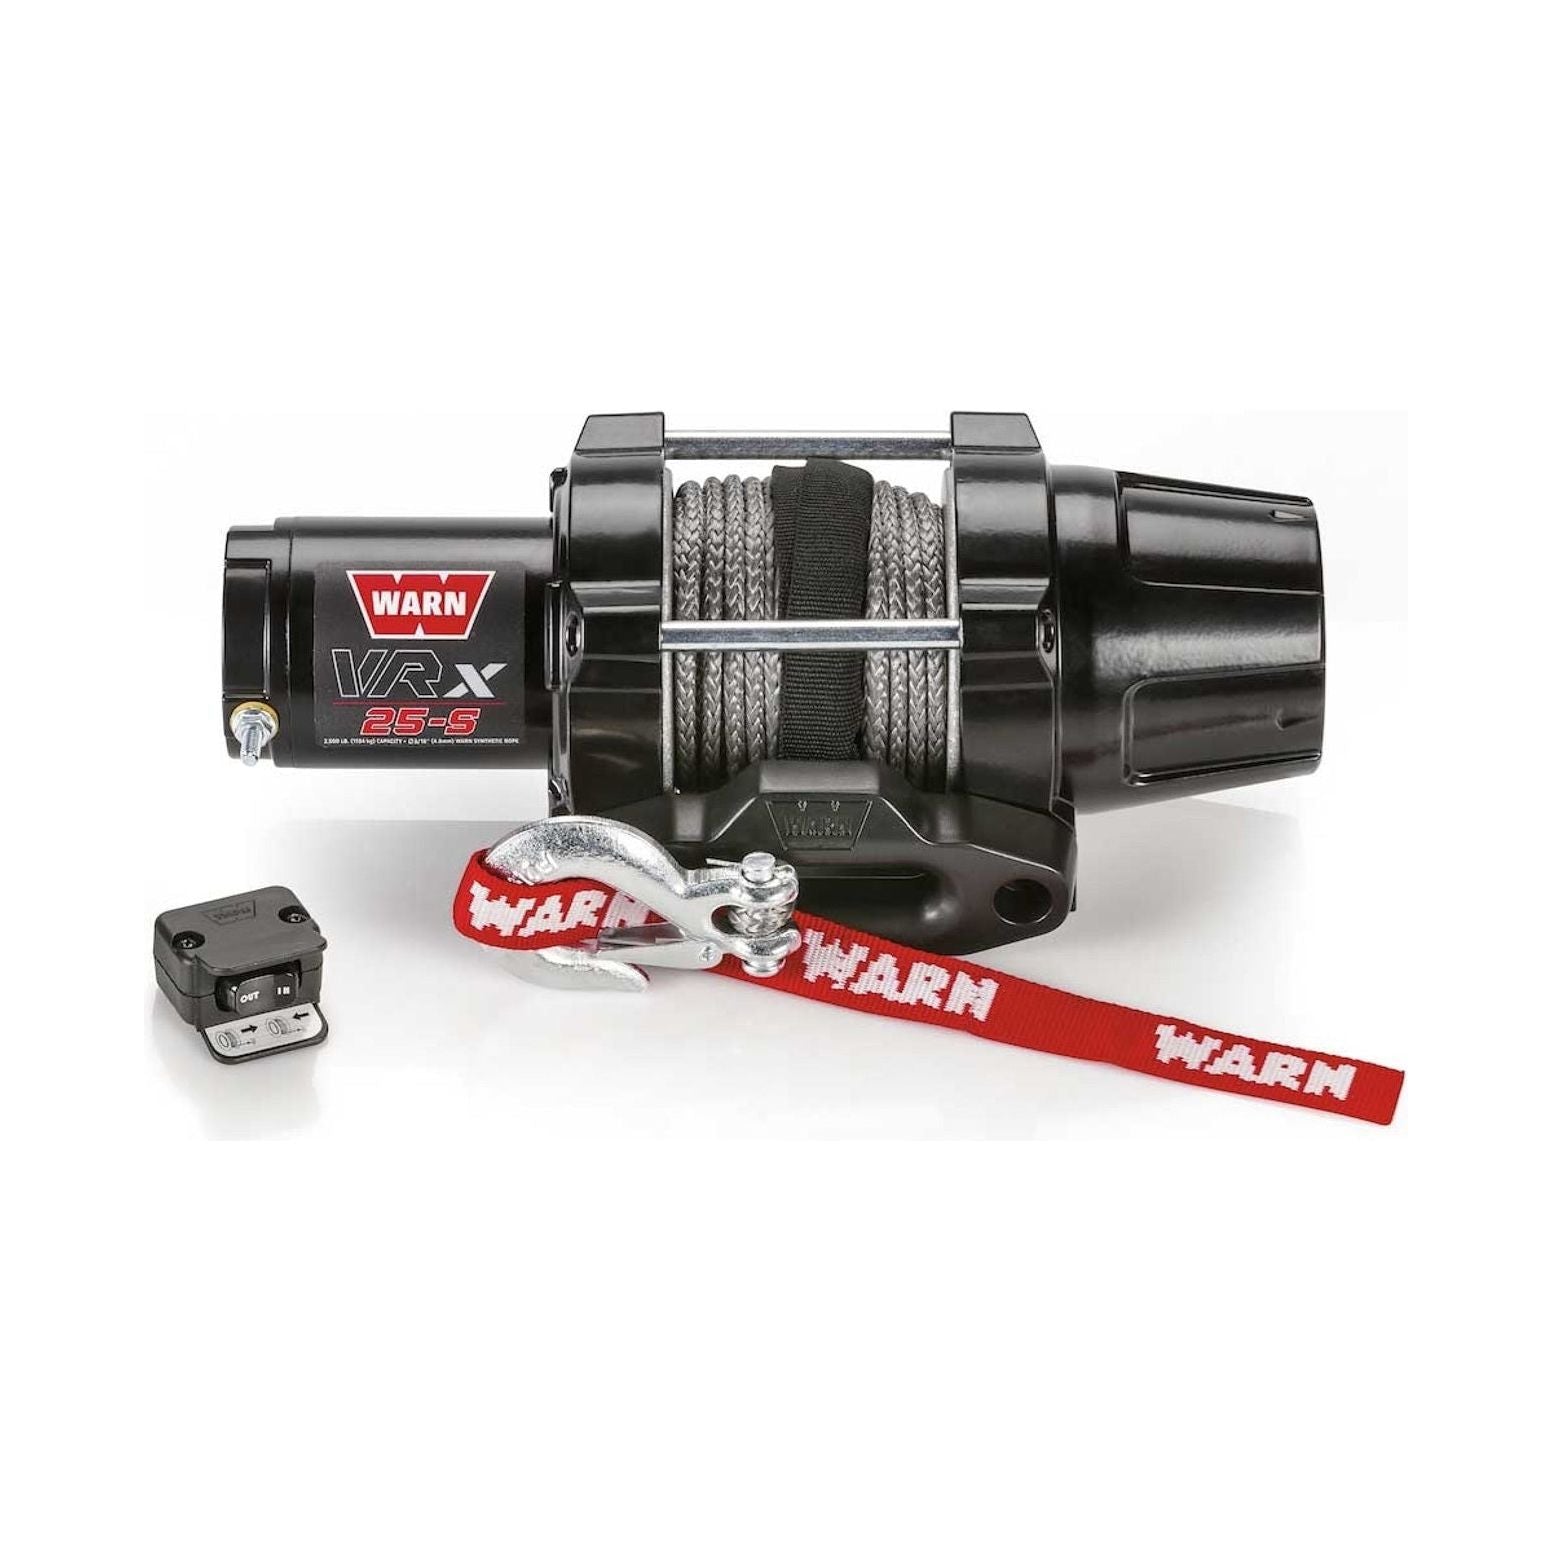 WARN 101020 - VRX 25-S Winch 2500lb Synthetic Rope